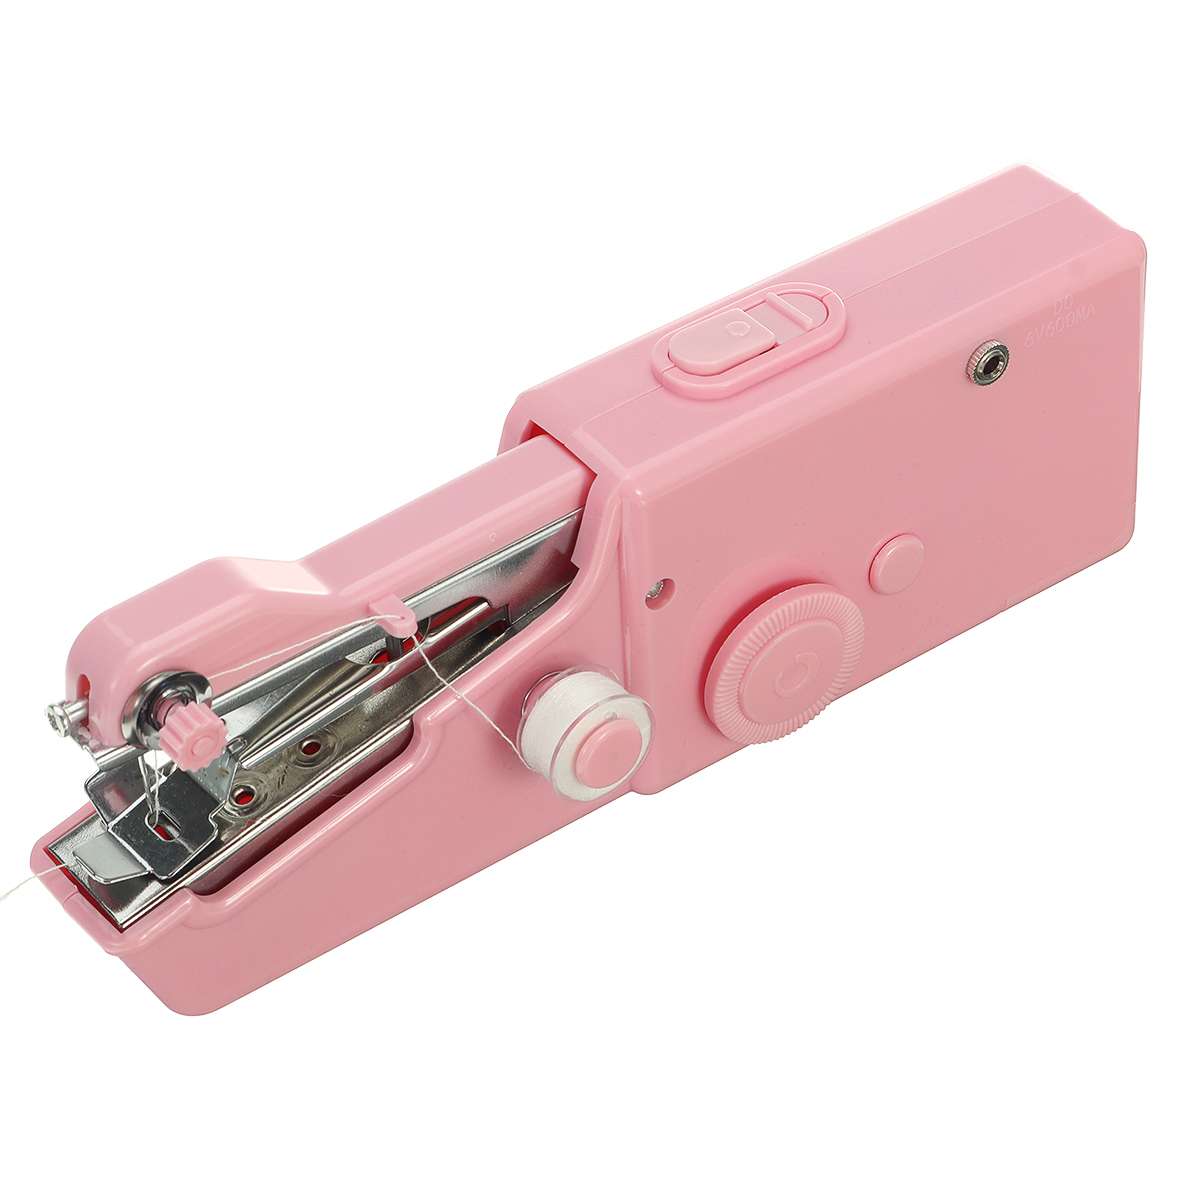 Without Battery Hand-held Electric Sewing Set Pink/Black/White Hand-held Sewing Machine